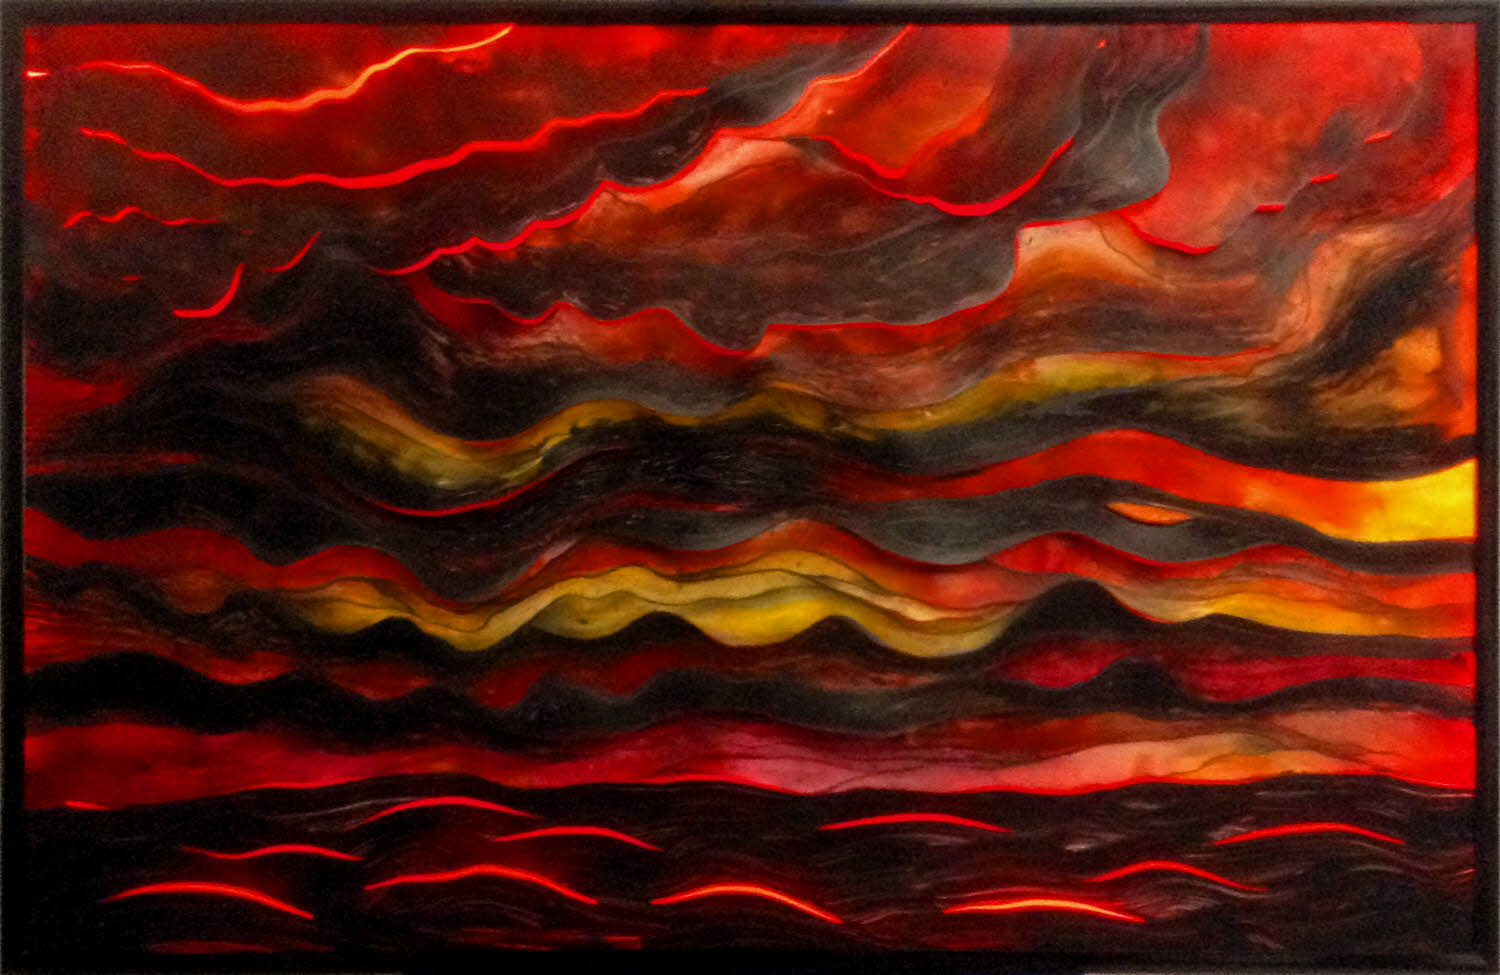 Cloudburst Sunset with LED lights, 2012, acrylic, graphite on cut synthetic paper, 26x40 inches